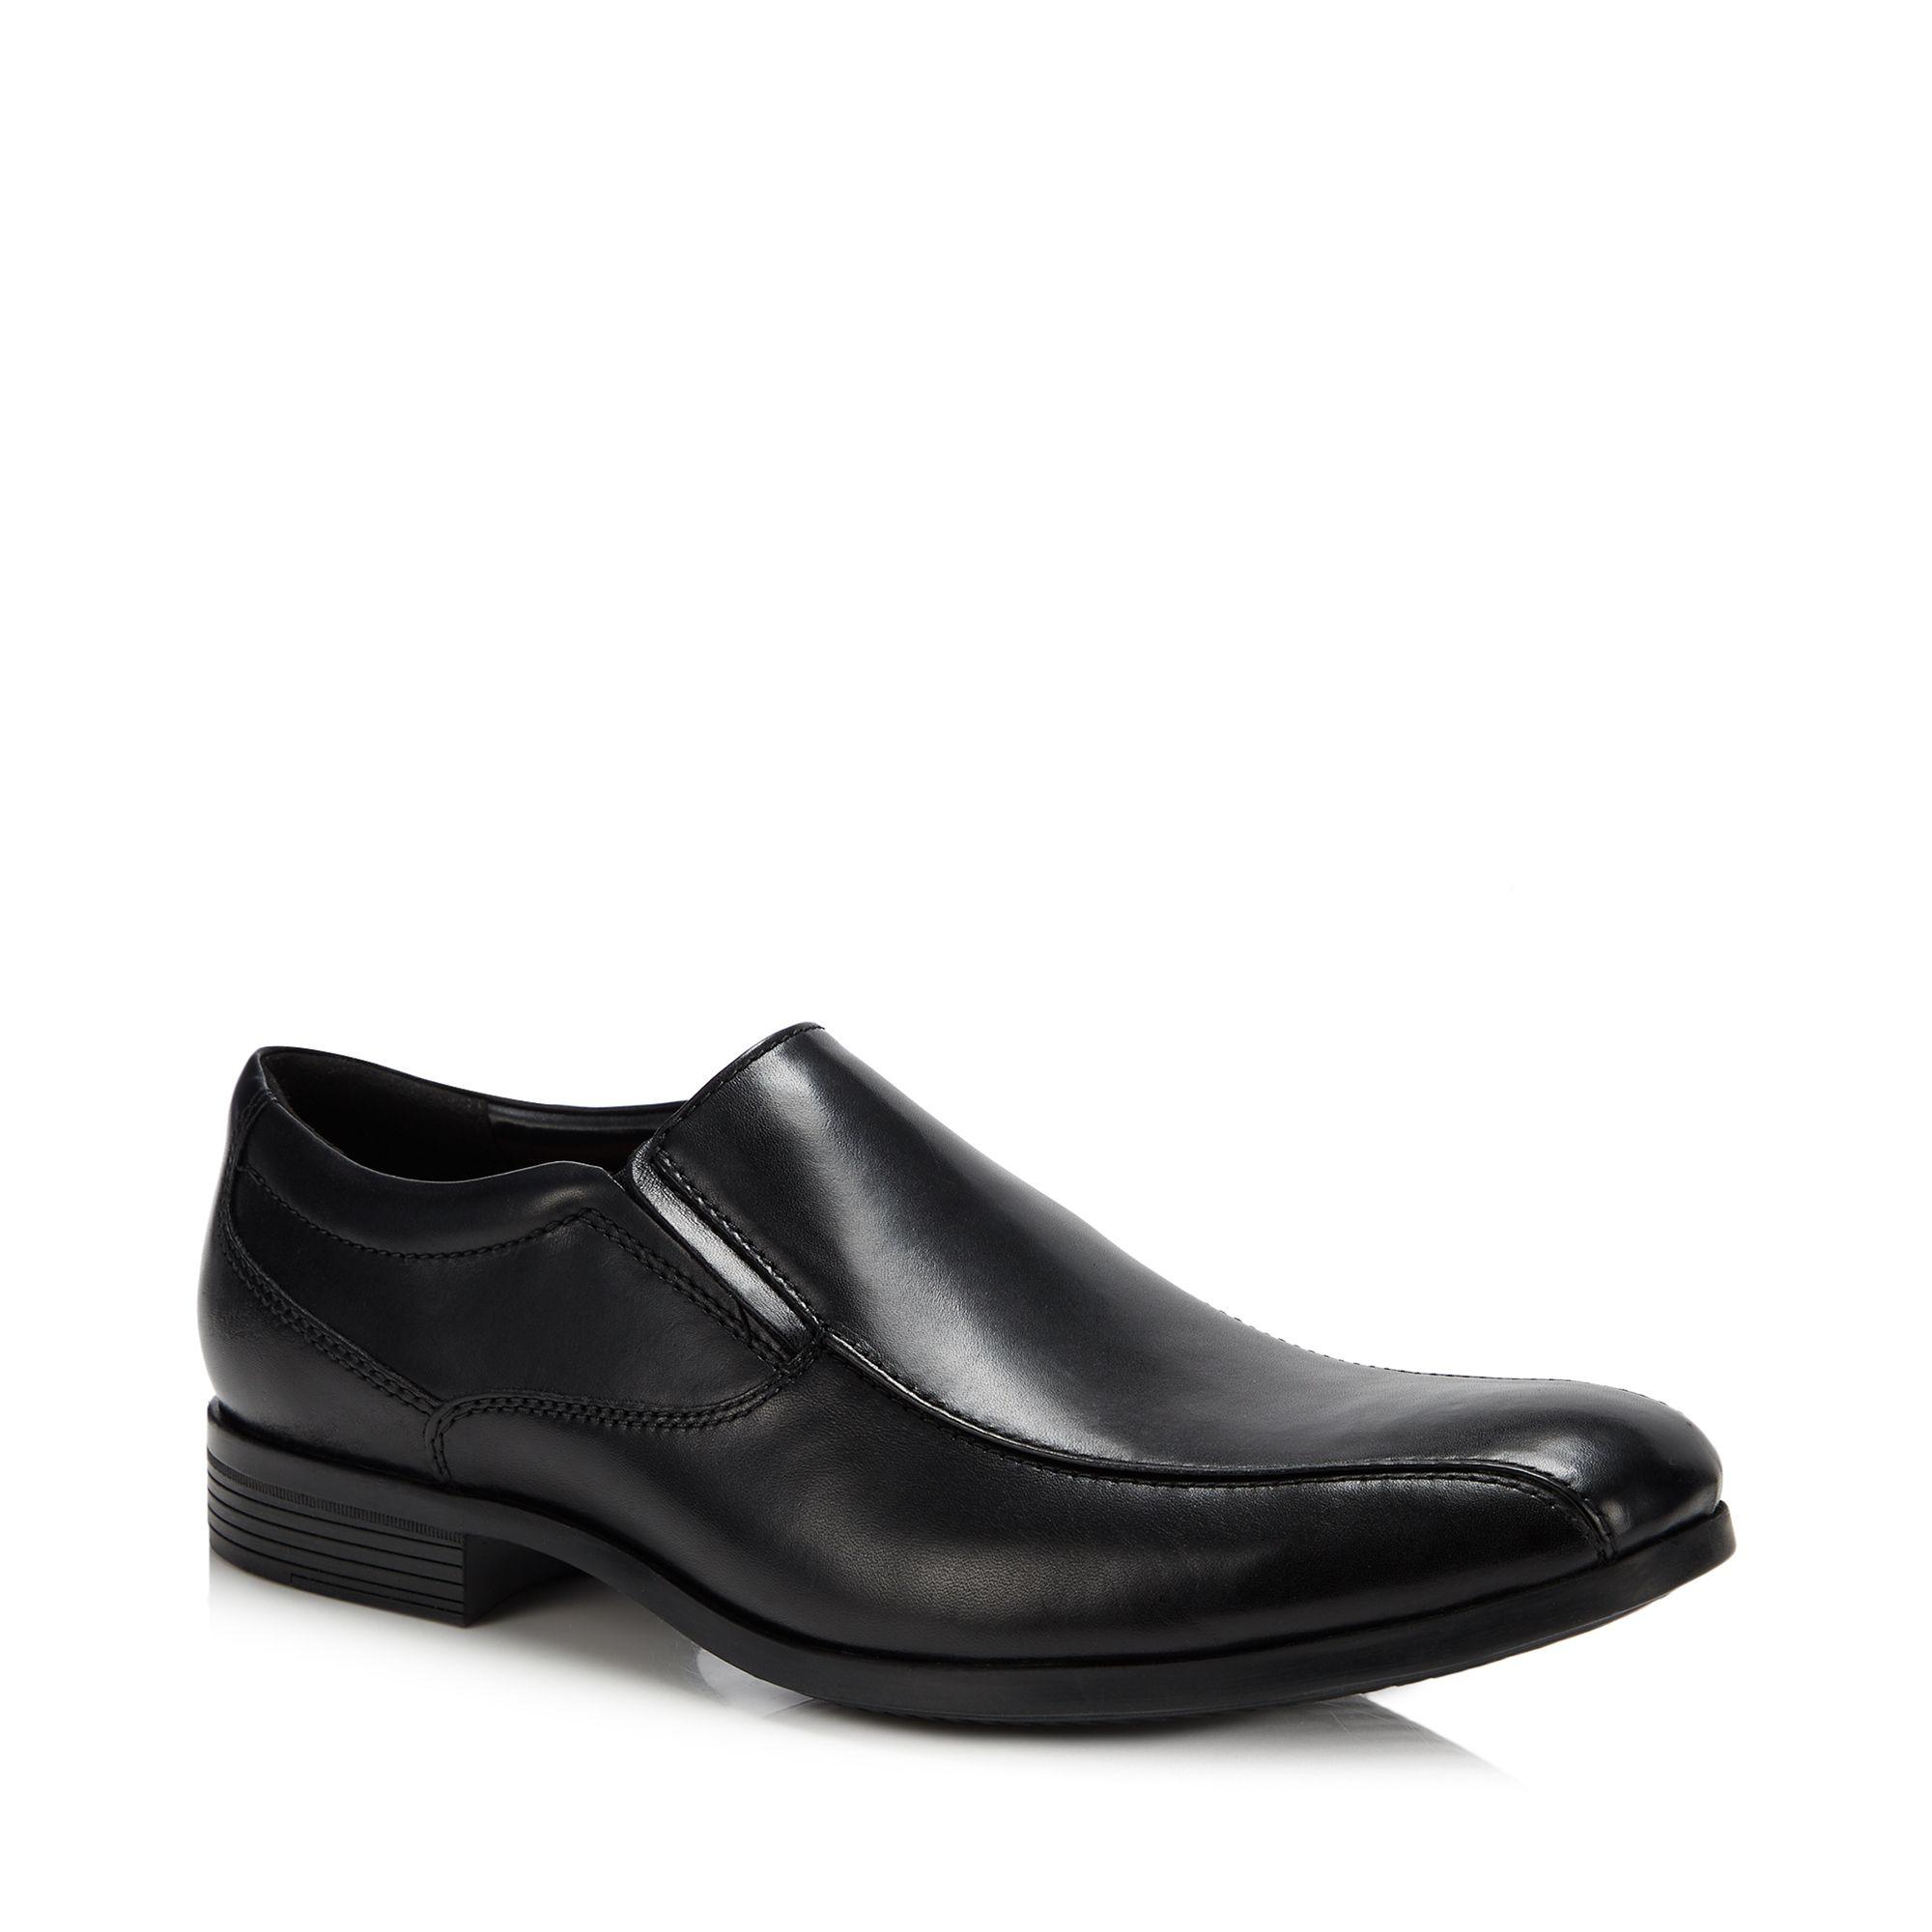 Clarks Men's Leather 'conwell' Slip On Shoes in Black for Men - Lyst